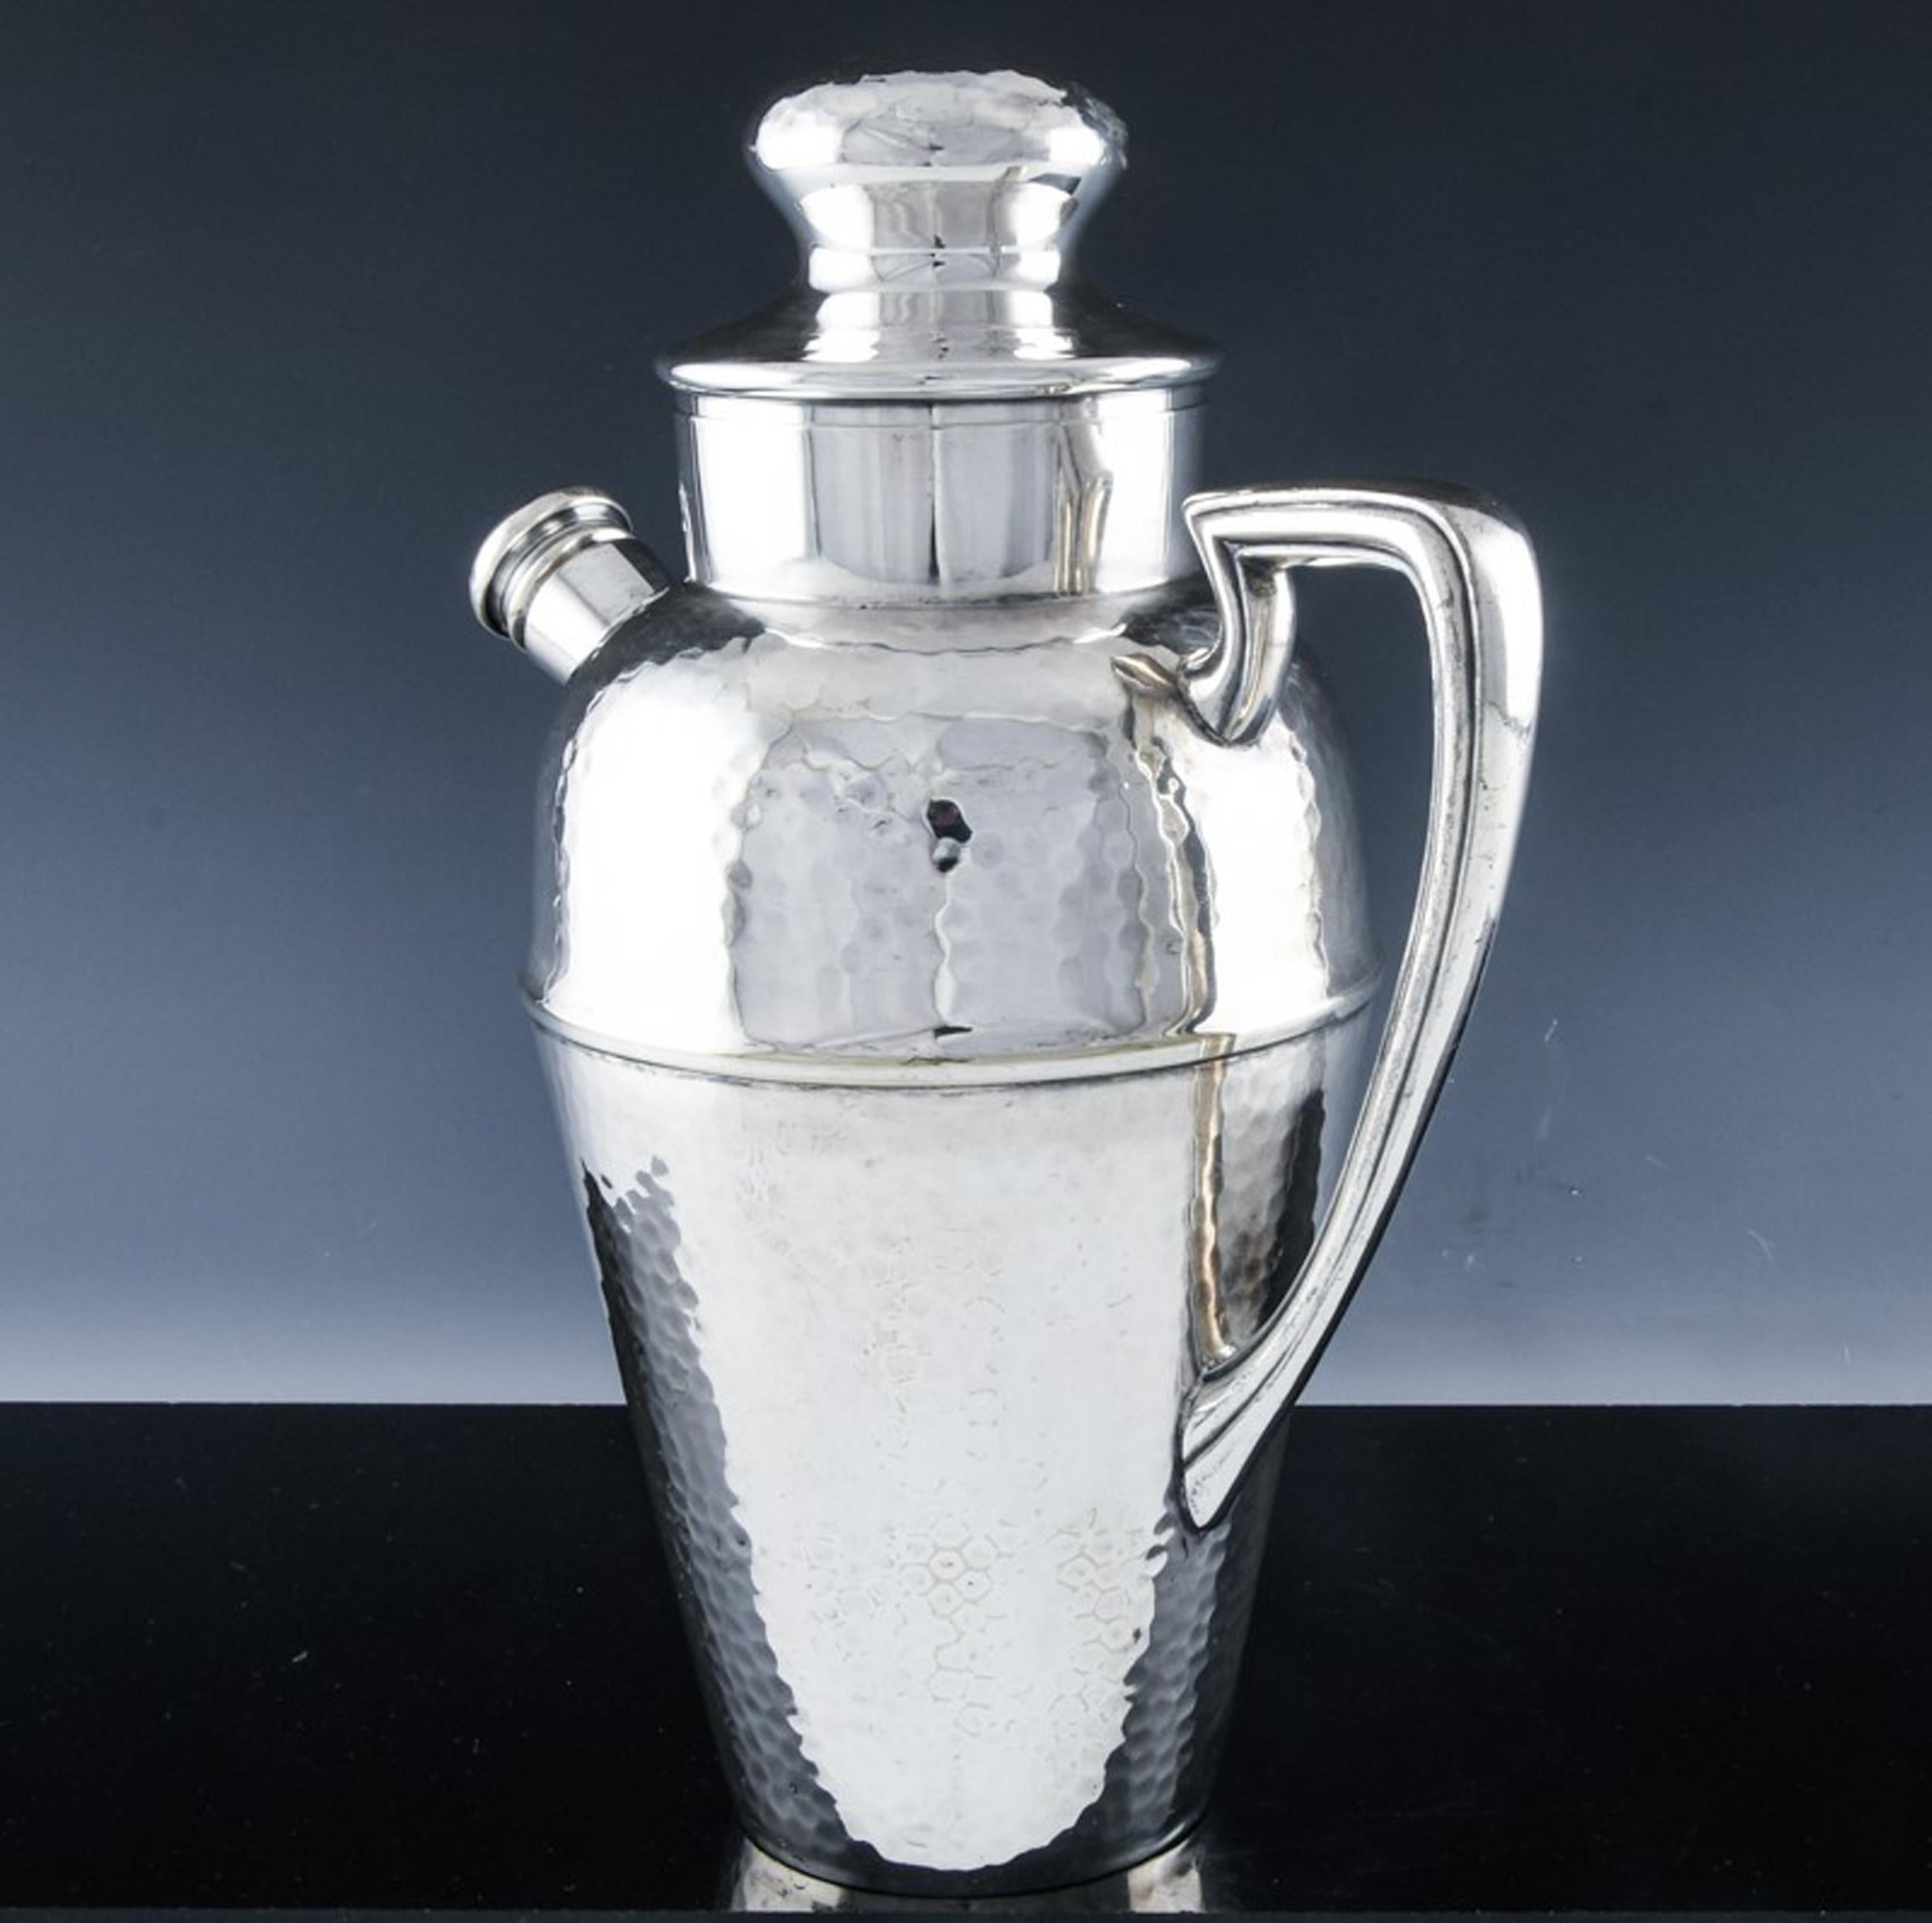 Art Deco Silver Plate Cocktail and Martine Shaker & Pitcher, 1930s